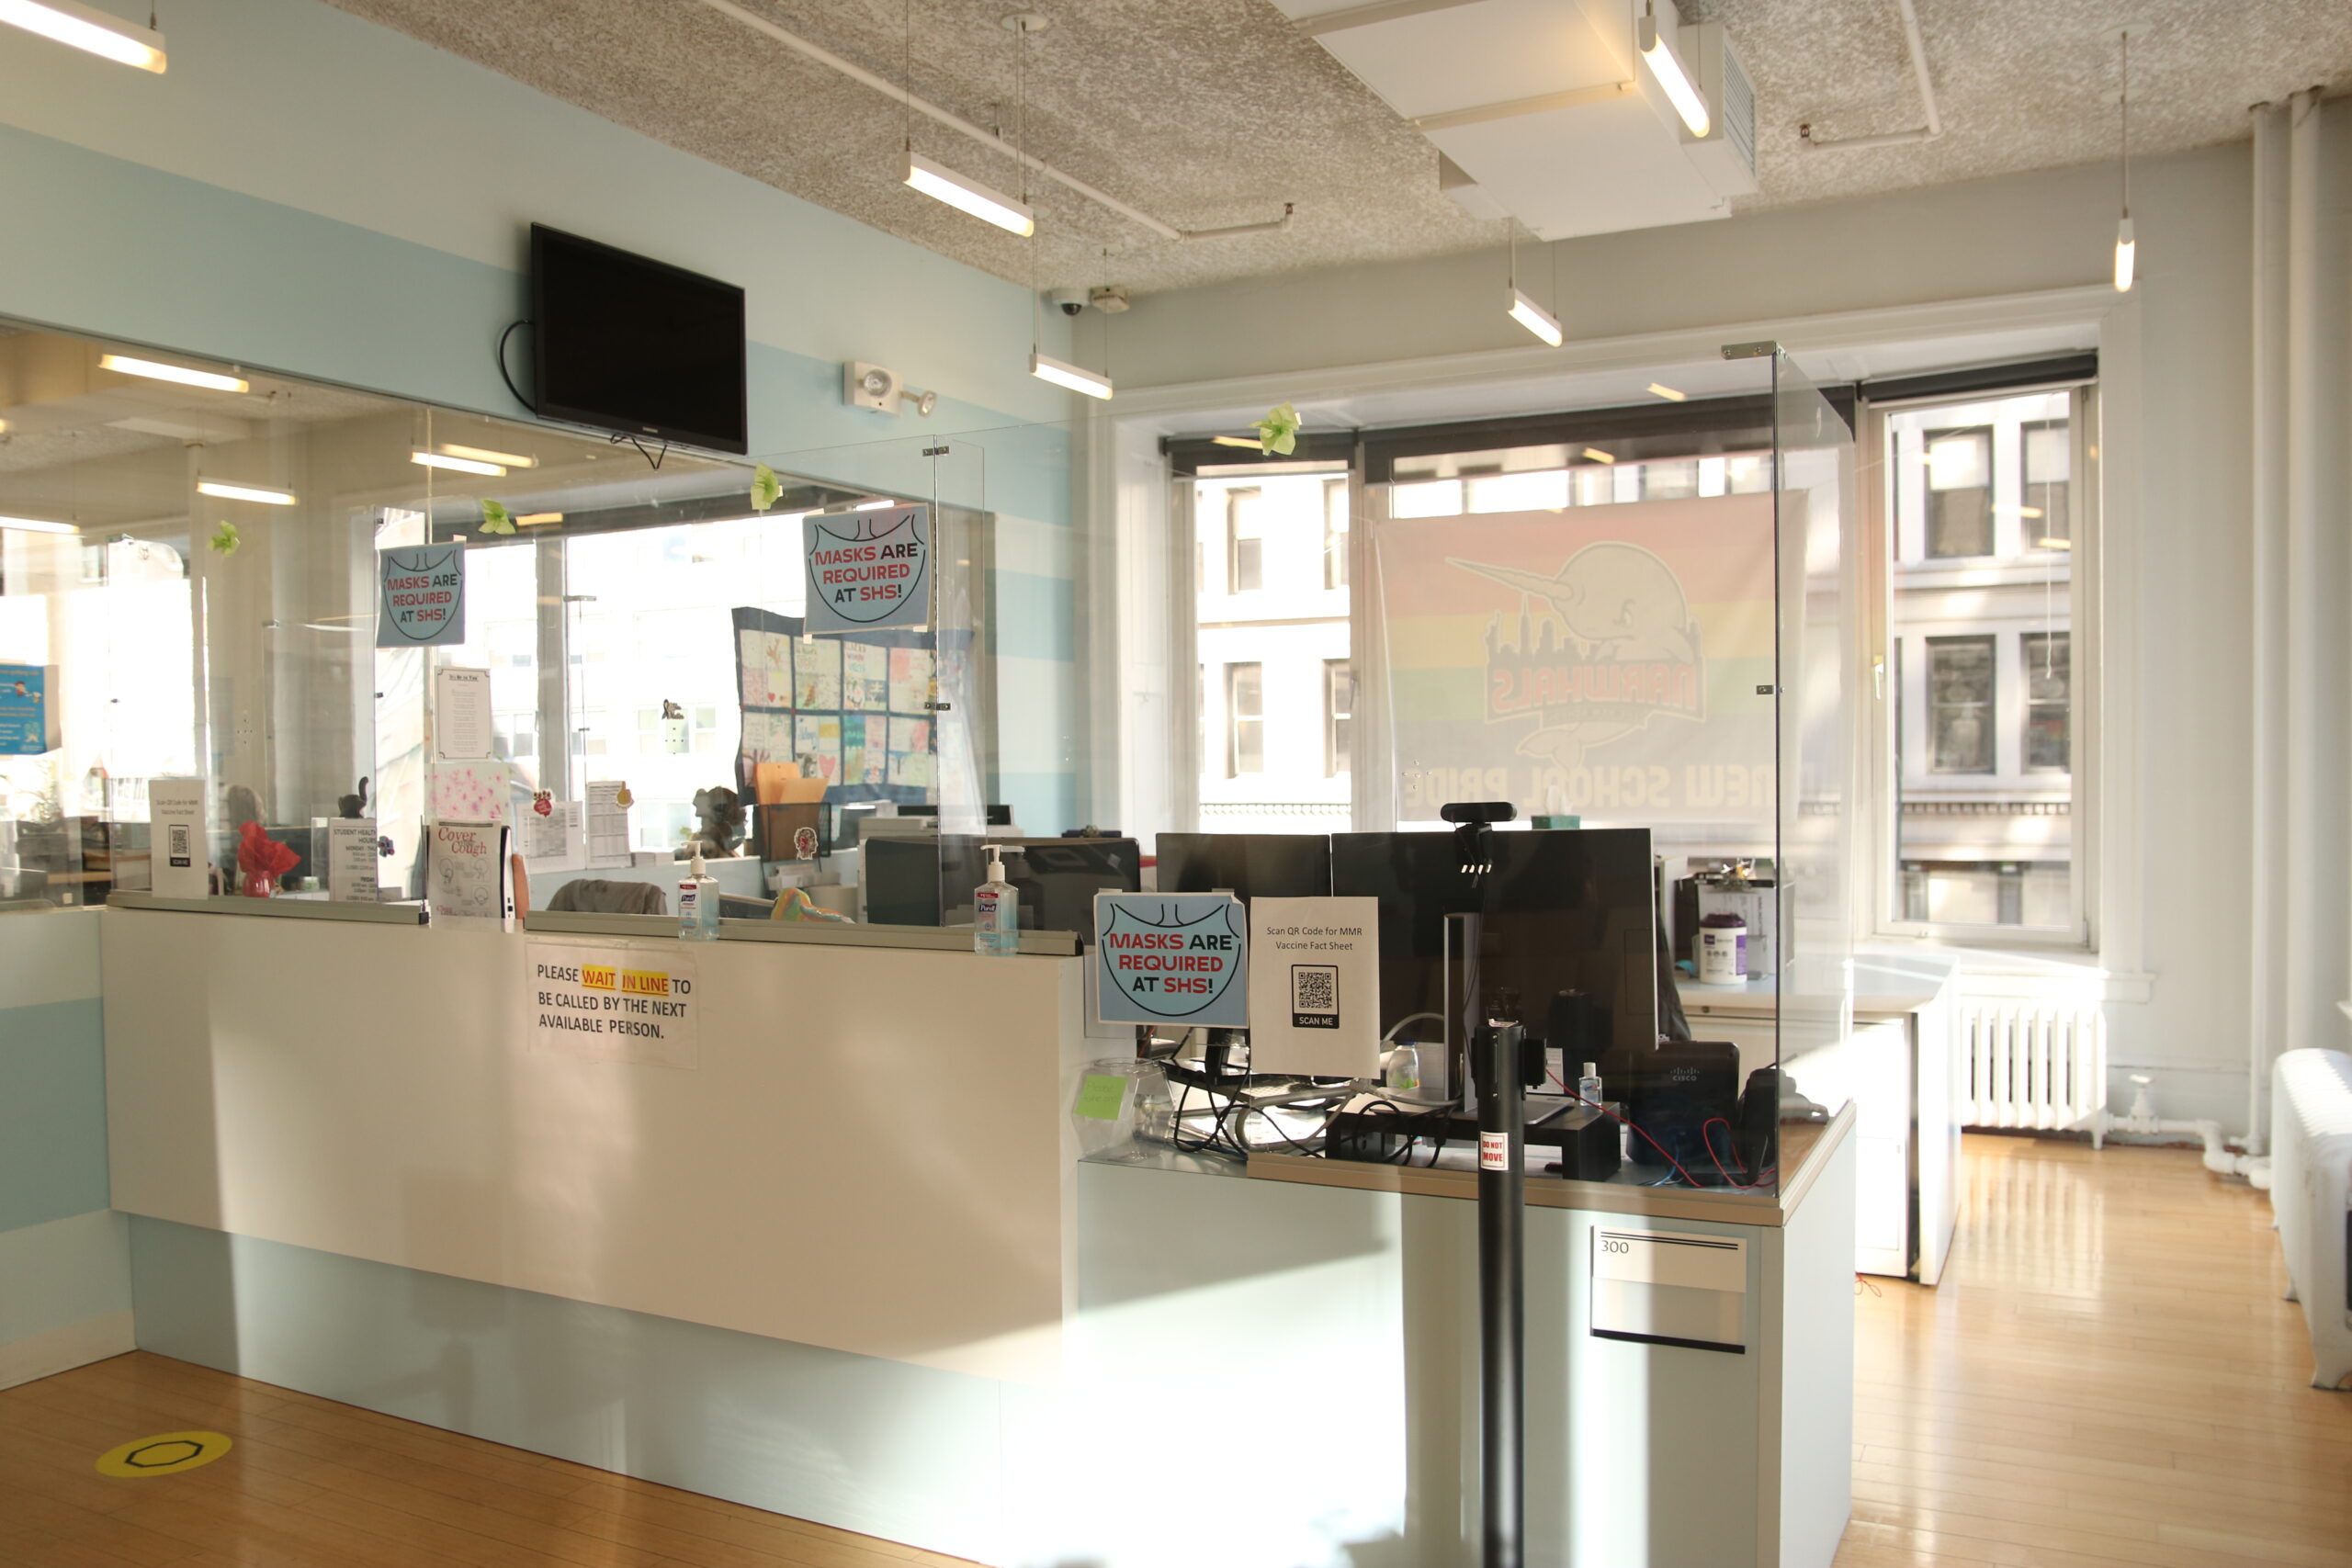 Photo of student health services office front desk